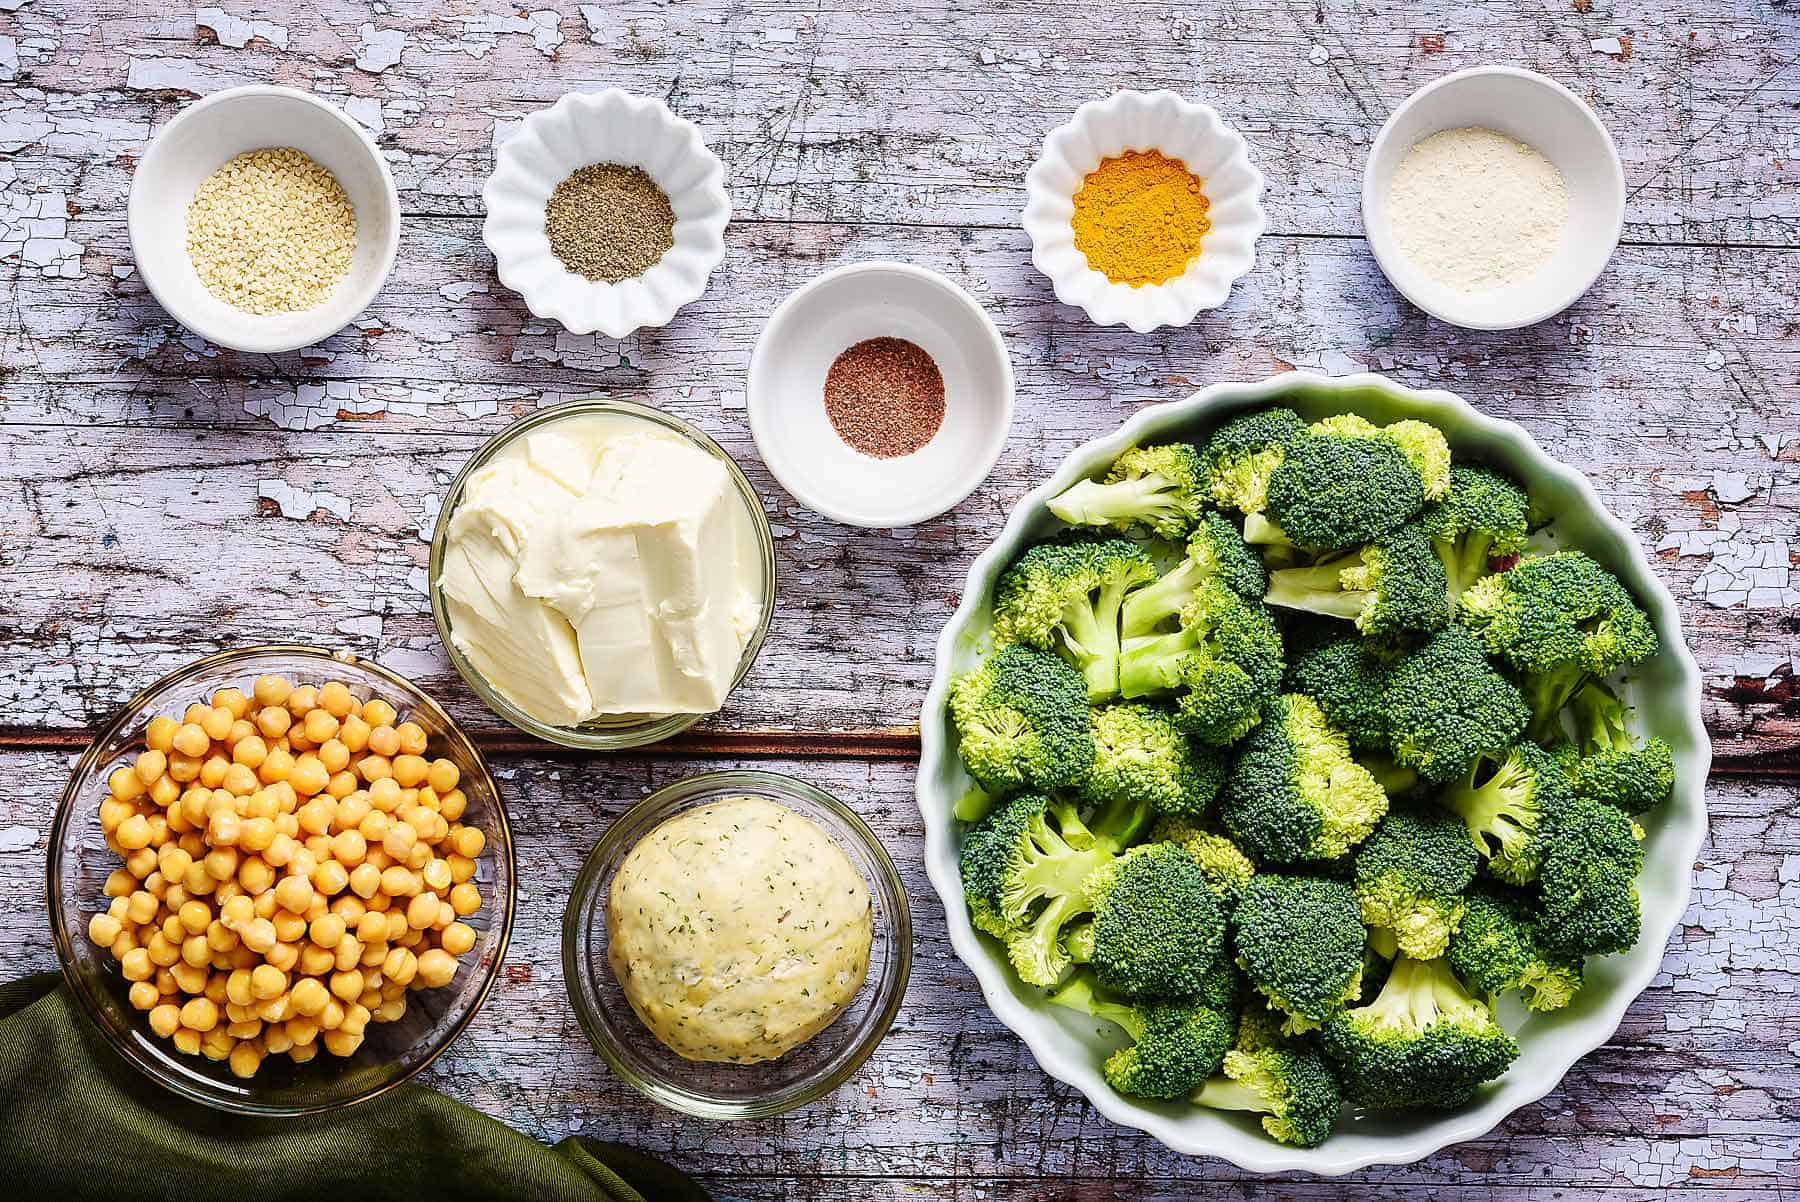 Ingredients for tofu and broccoli quiche